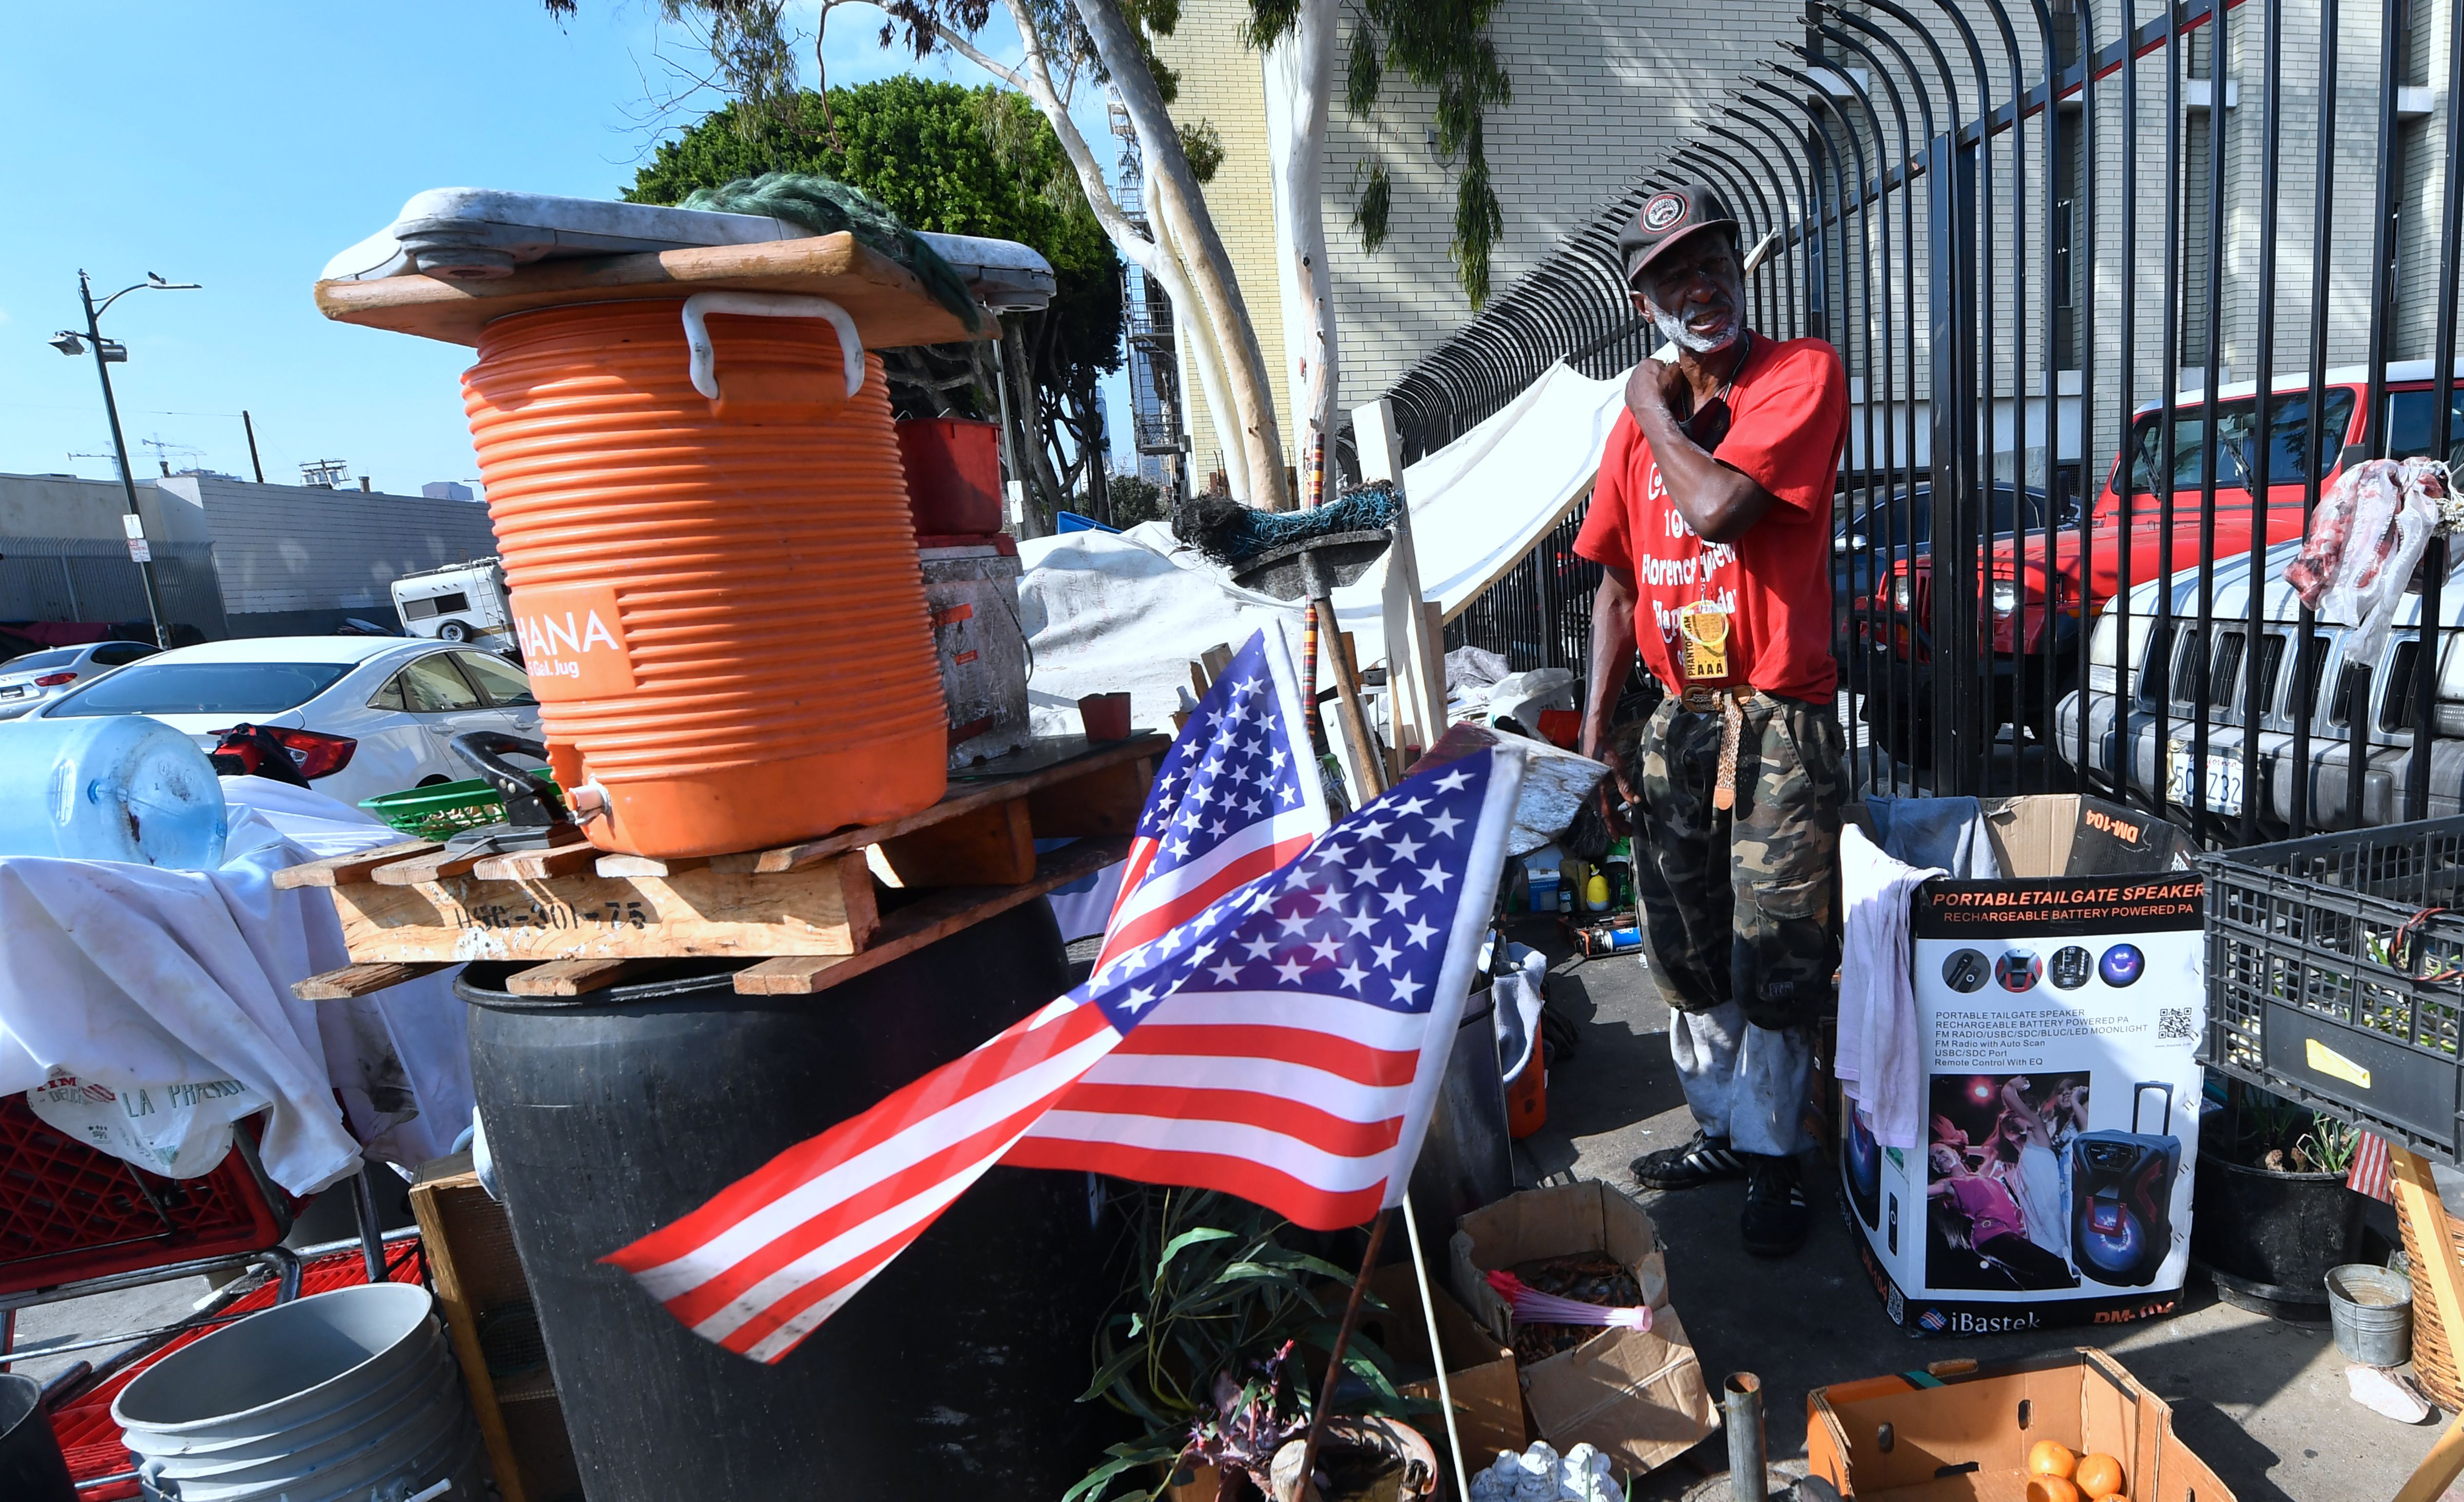 Flags are hoisted at the street corner encampment of homeless veteran Kendrick Bailey on November 10, 2017 in Los Angeles, California, one of the nation's largest homeless populations which saw a 57 percent increase in the number of homeless vets living on Los Angeles streets from last year.  
                      Bailey, who says he served in Vietnam, said he has been living on the streets since at least as long as Obama became president. Veterans Day, an official United States public holiday, is observed annually on November 11th.  / AFP PHOTO / FREDERIC J. BROWN        (Photo credit should read FREDERIC J. BROWN/AFP/Getty Images) (FREDERIC J. BROWN&mdash;AFP/Getty Images)